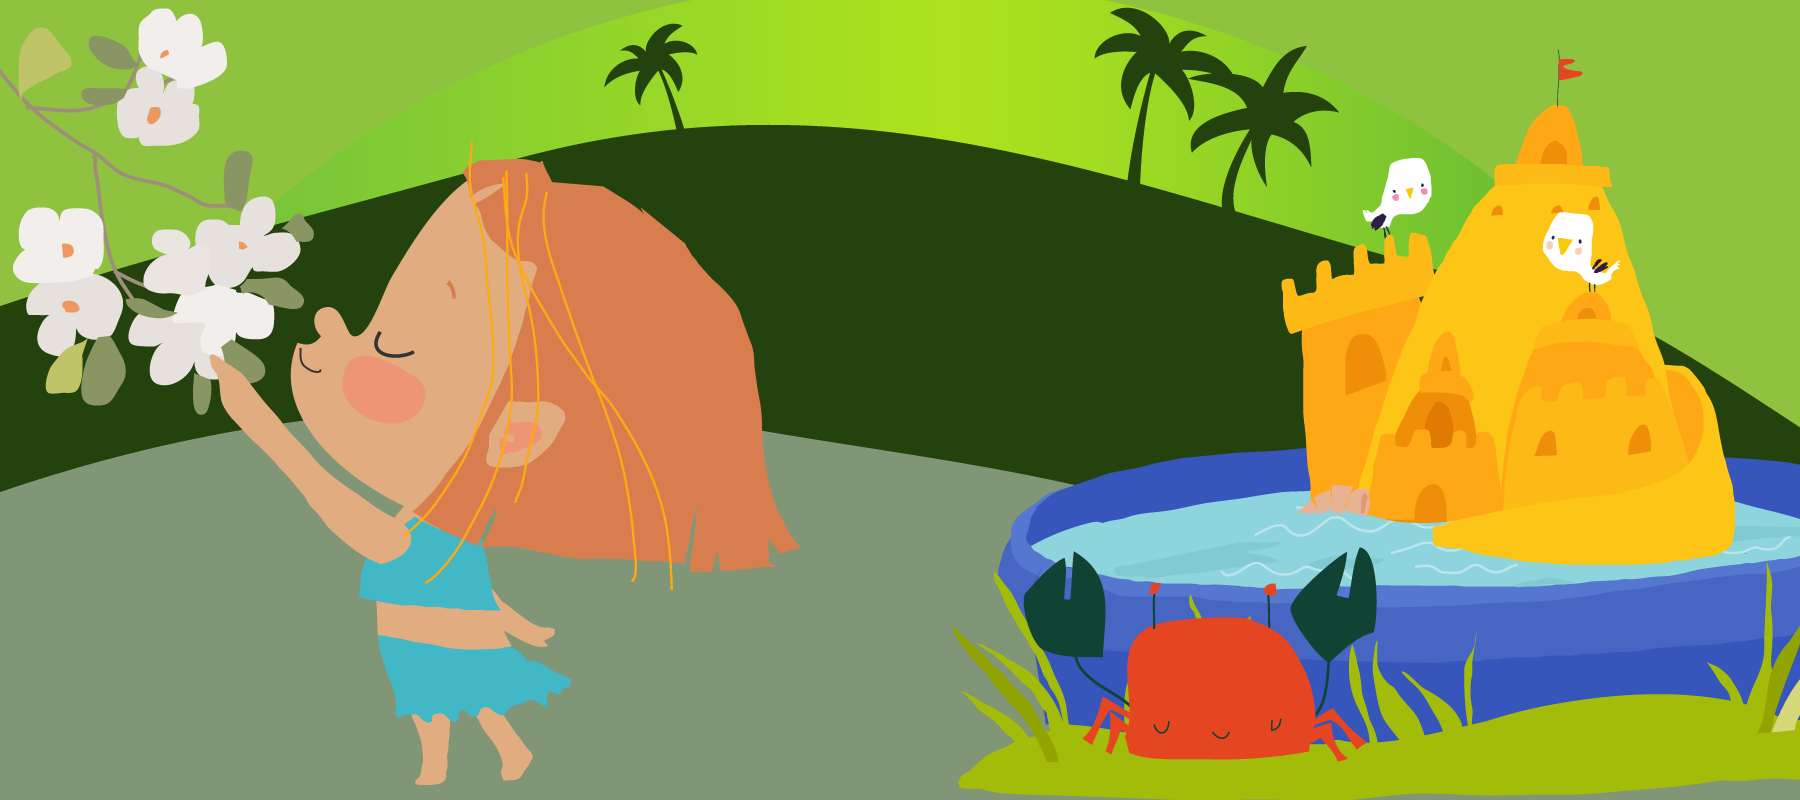 Illustration on a green background, child smells flowers with a swimming pool, sand castle, and crab in the background.